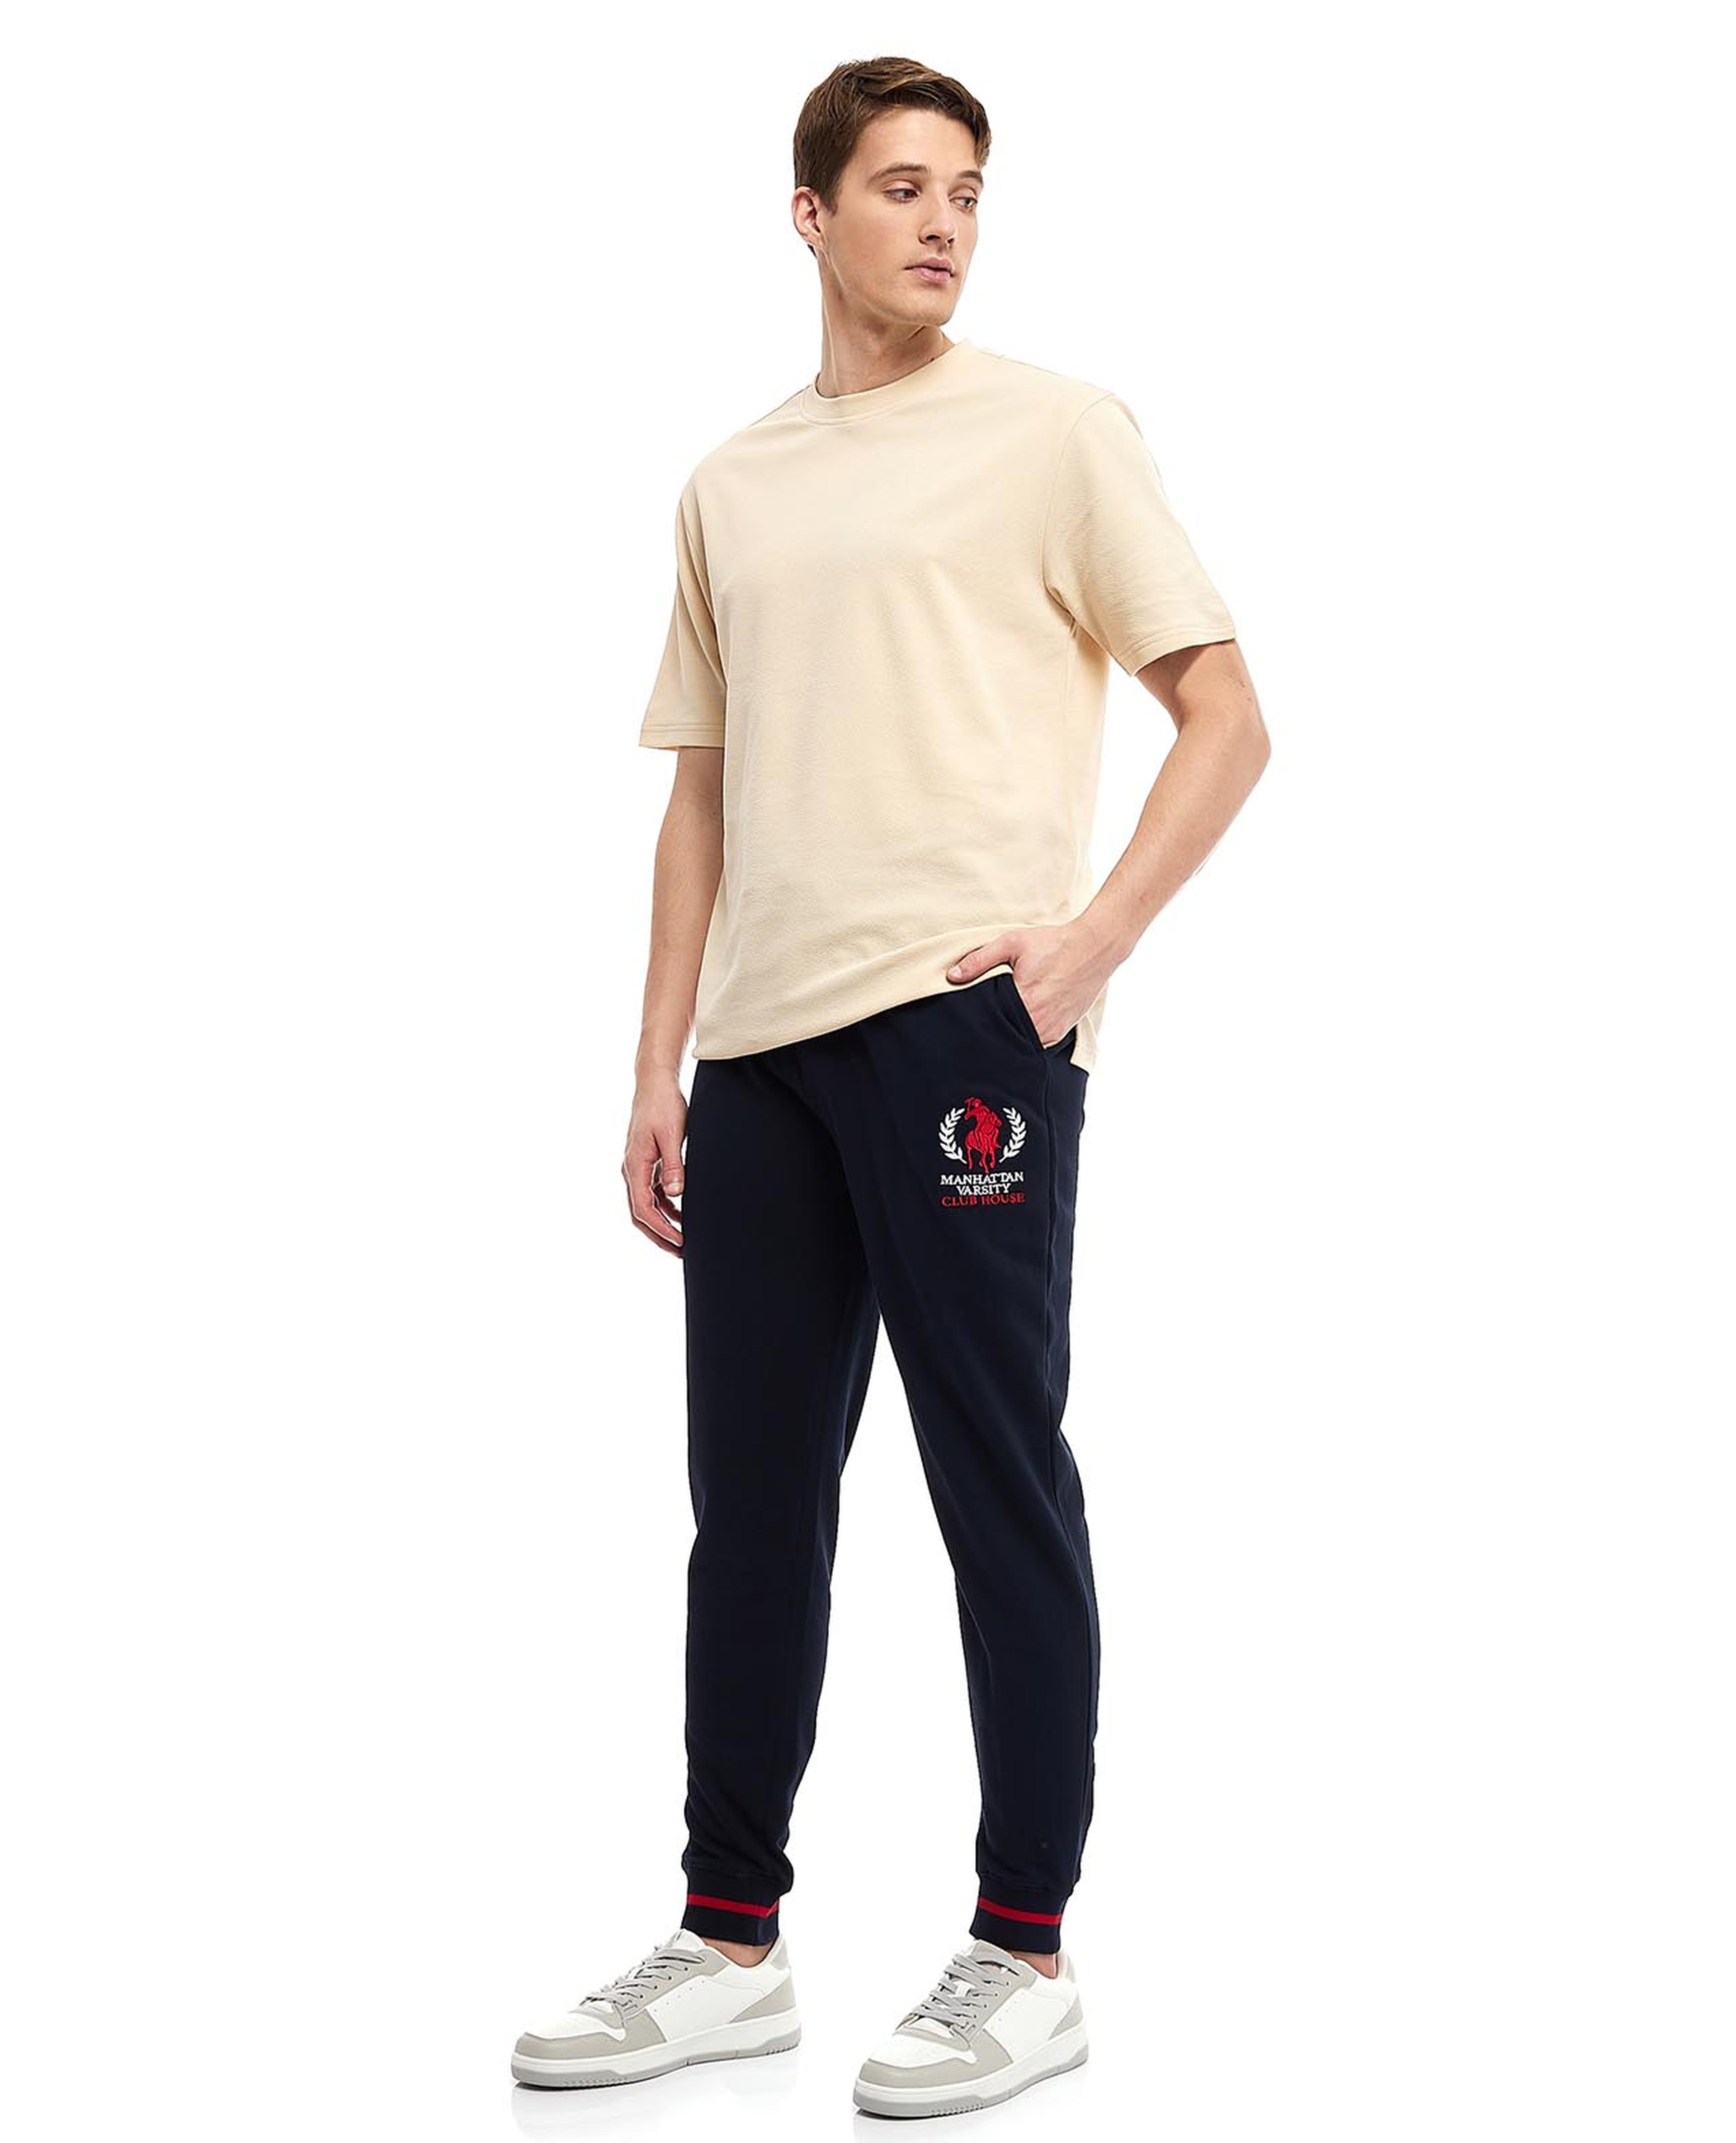 Embroidery Detail Joggers with Drawstring Waist